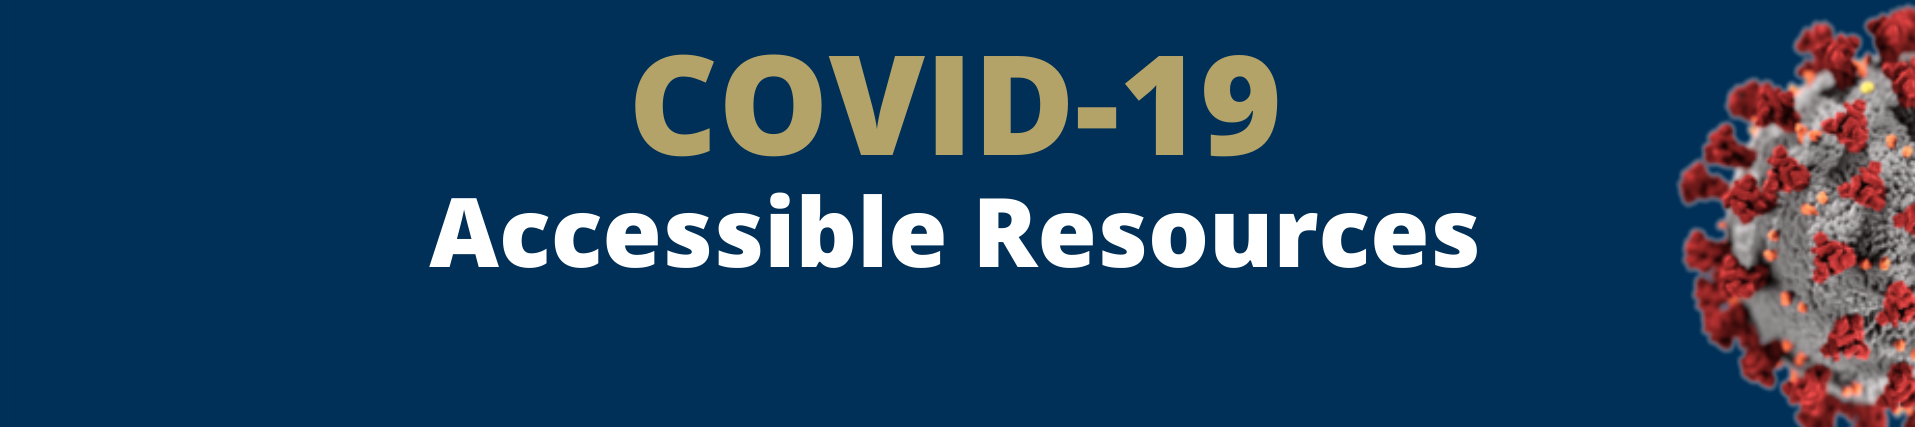 Welcome to the COVID-19 Accessible Resources Microsite!